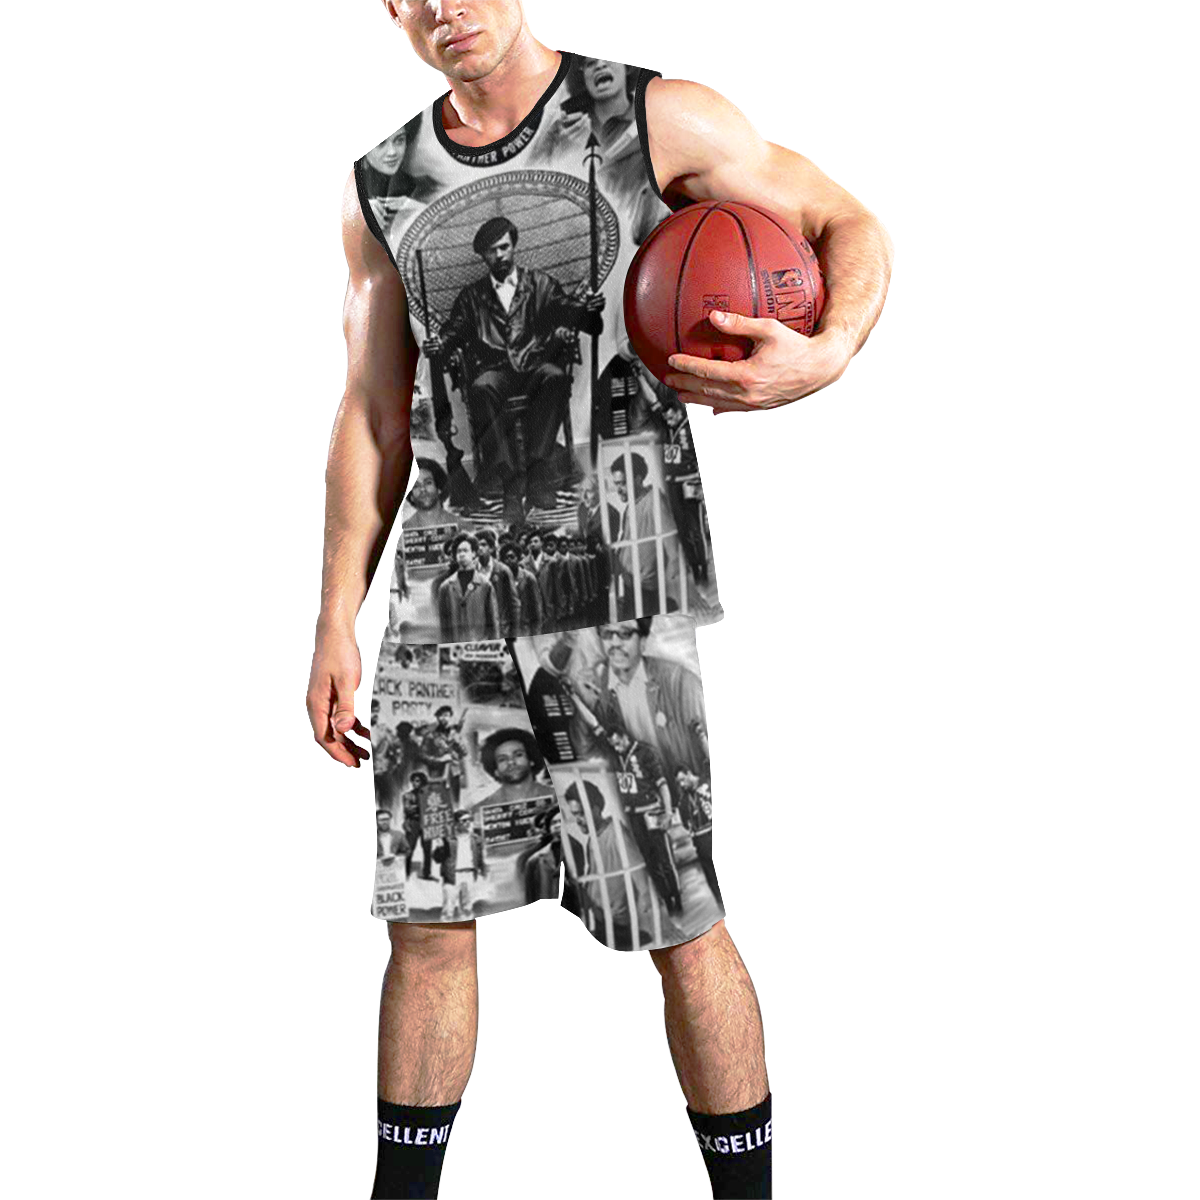 BLACK PANTHER PARTY All Over Print Basketball Uniform